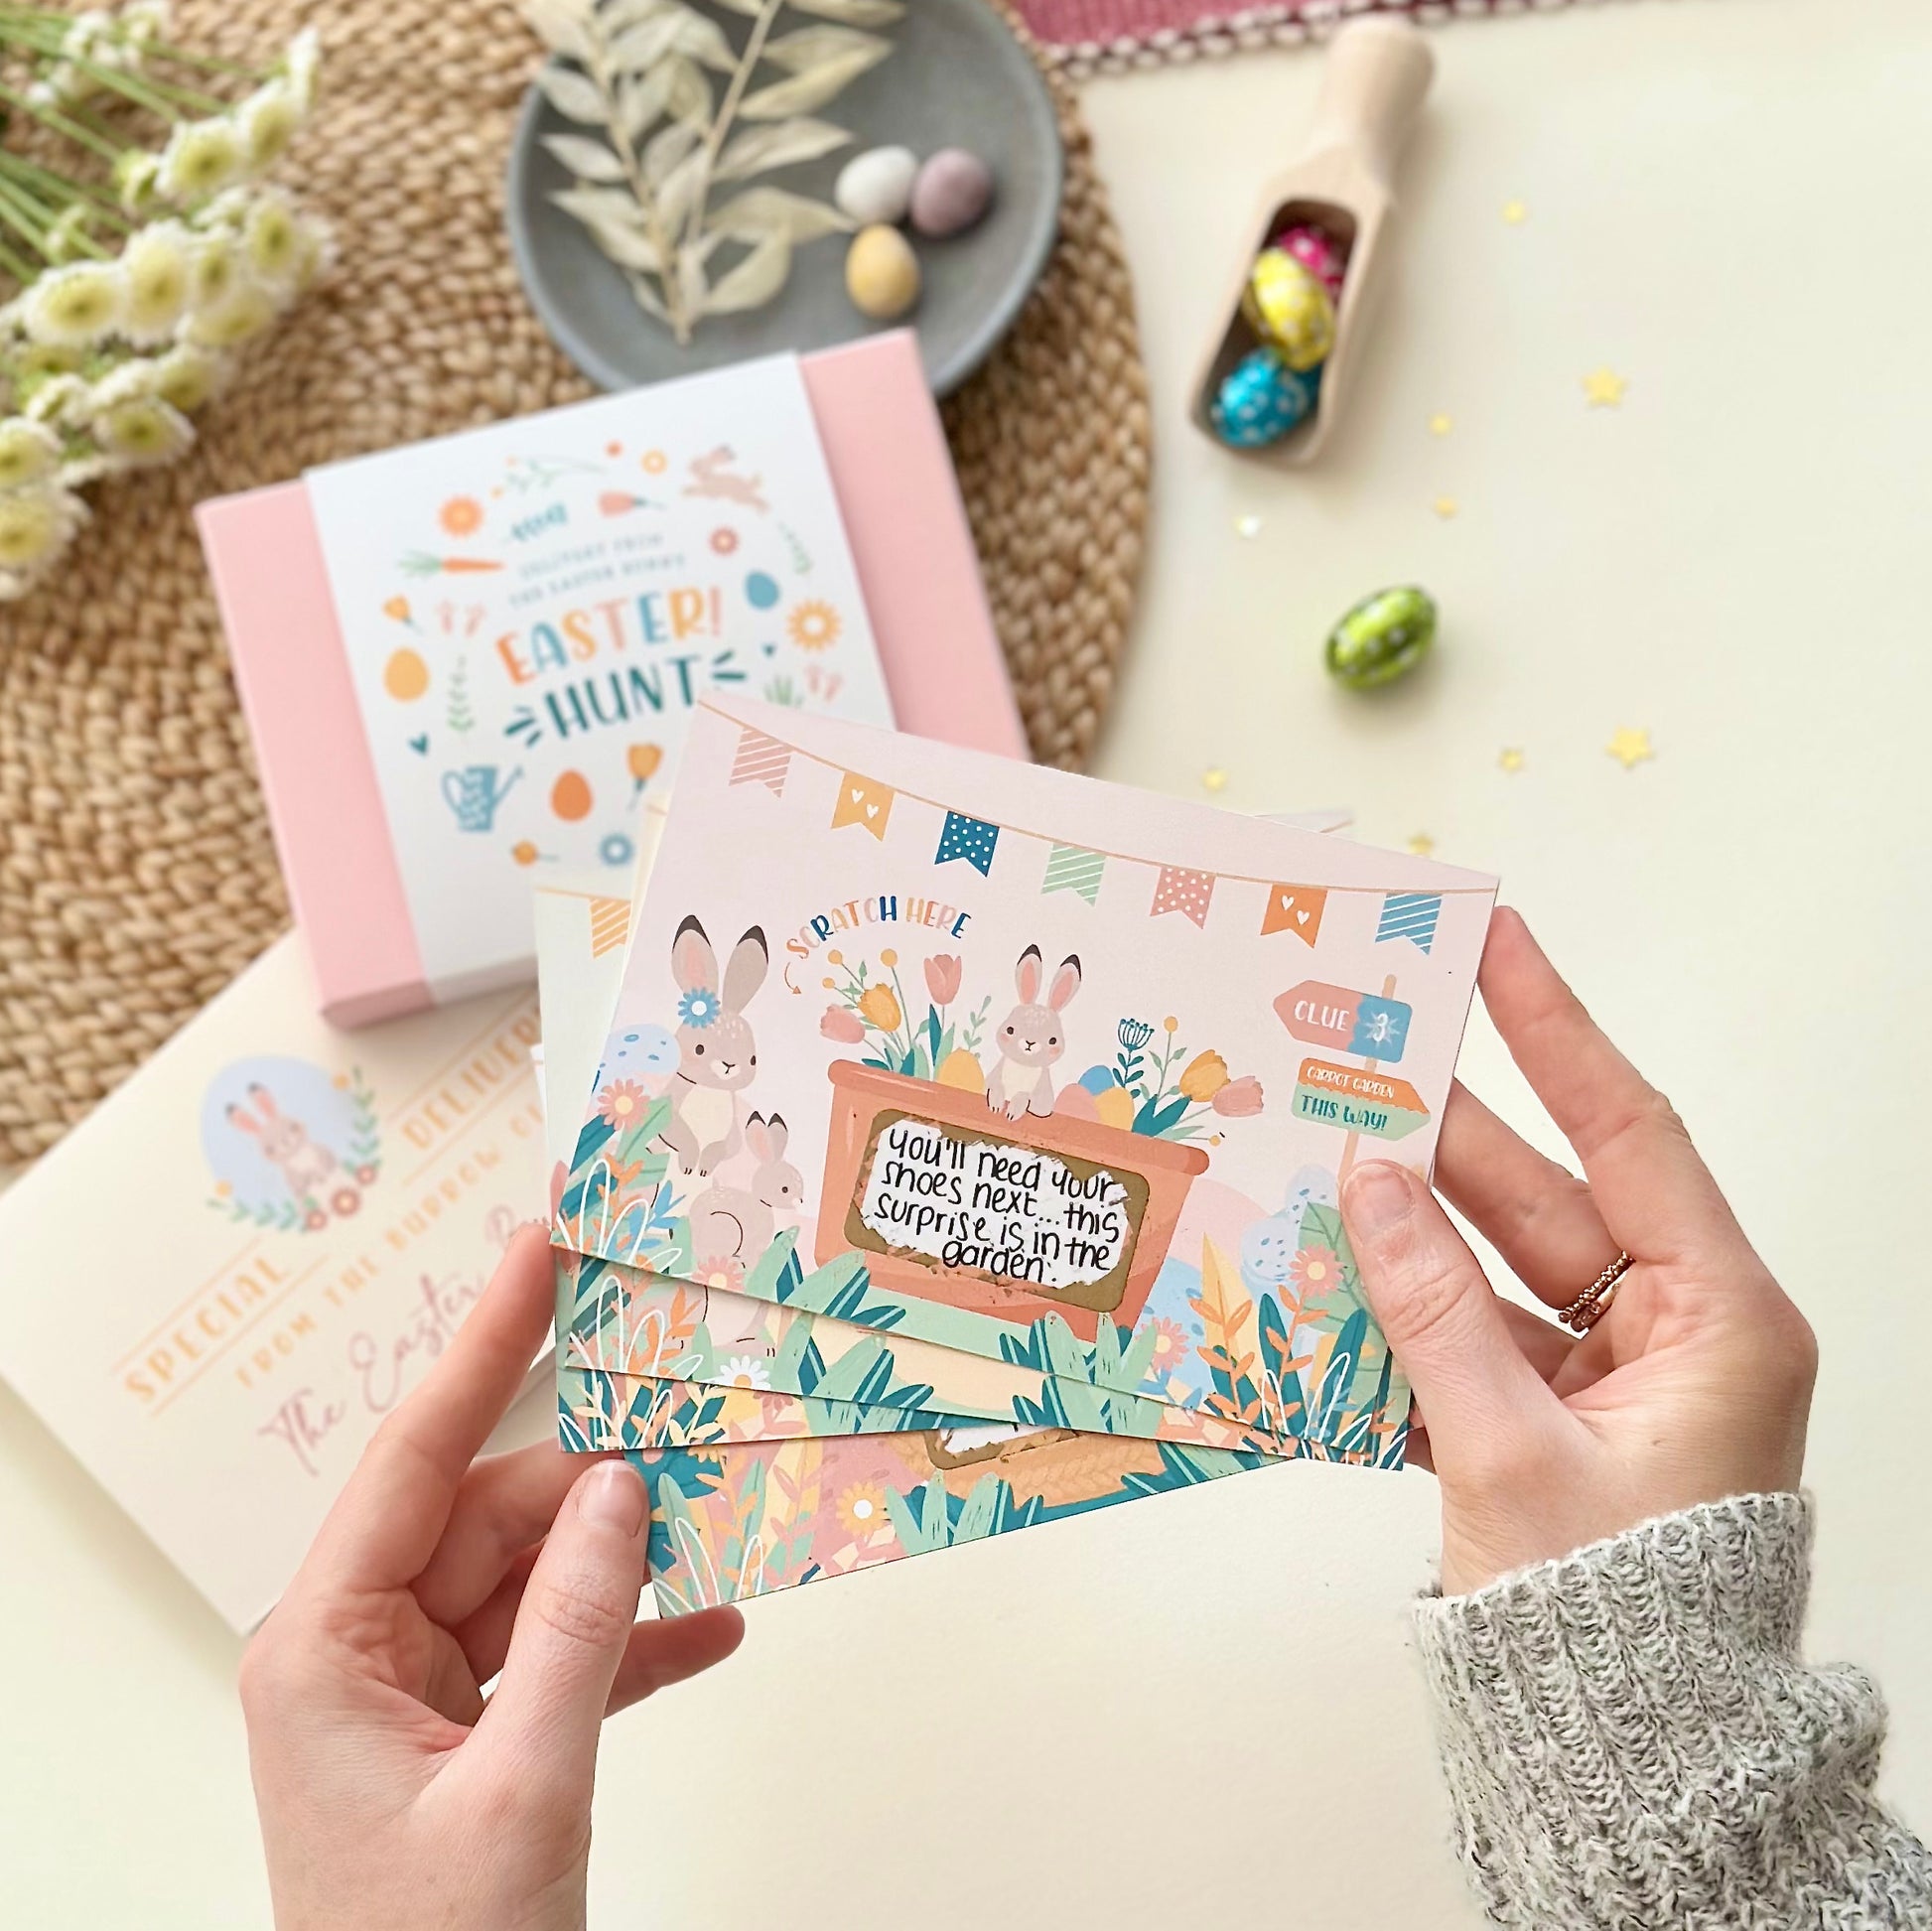 Easter Egg Hunt With Scratch Card Clues designed by Rodo Creative